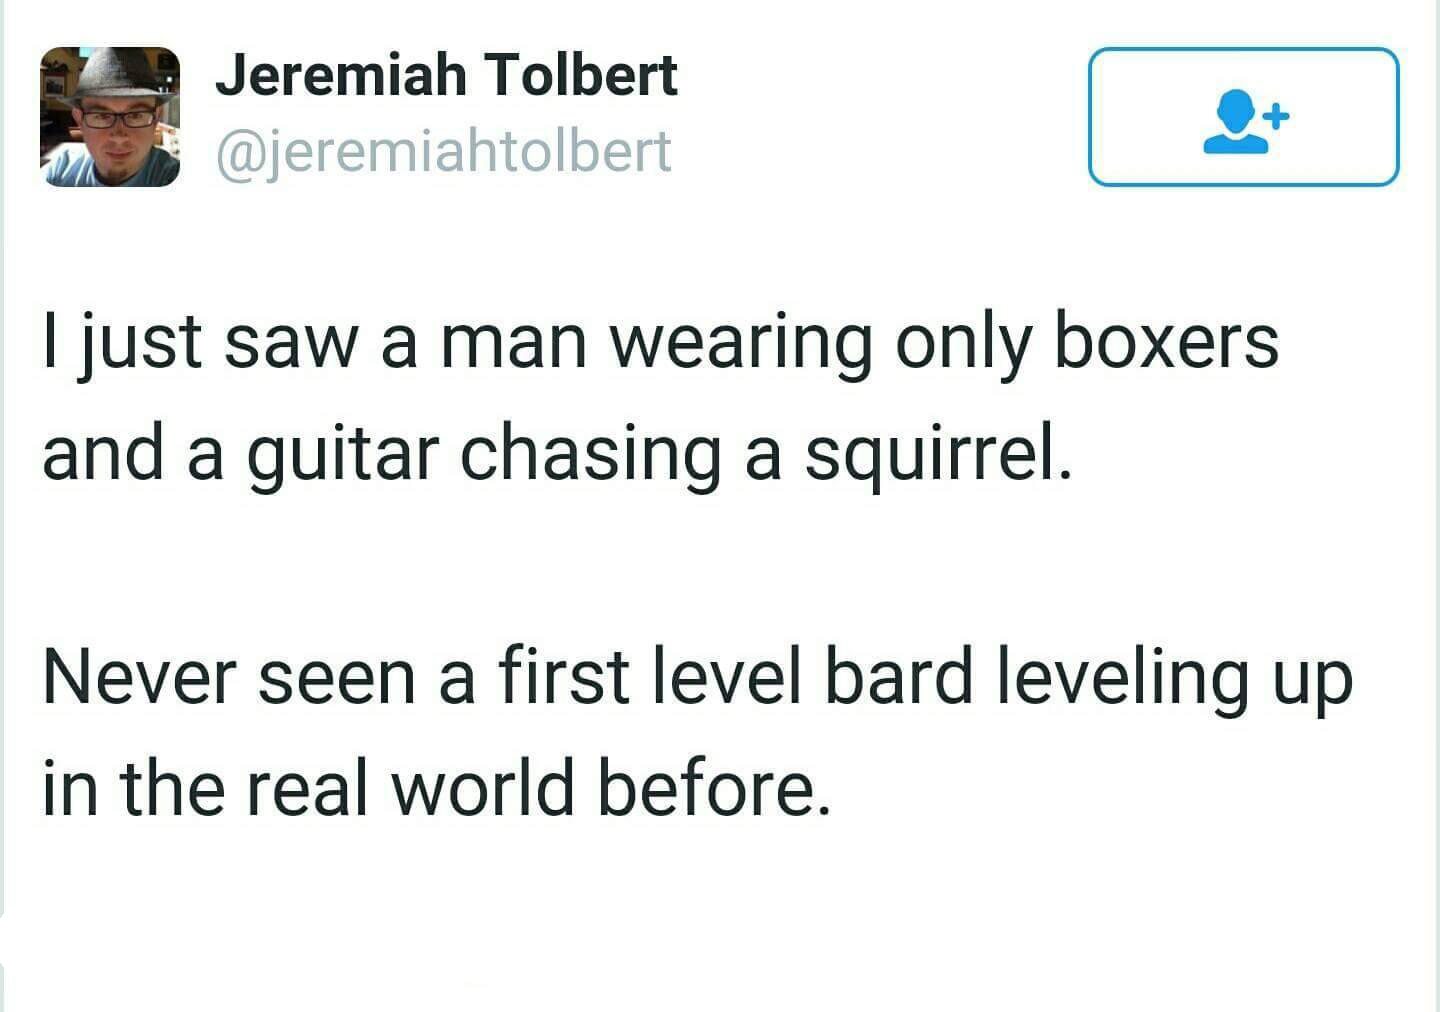 dank memes - Meme - Jeremiah Tolbert I just saw a man wearing only boxers and a guitar chasing a squirrel. Never seen a first level bard leveling up in the real world before.